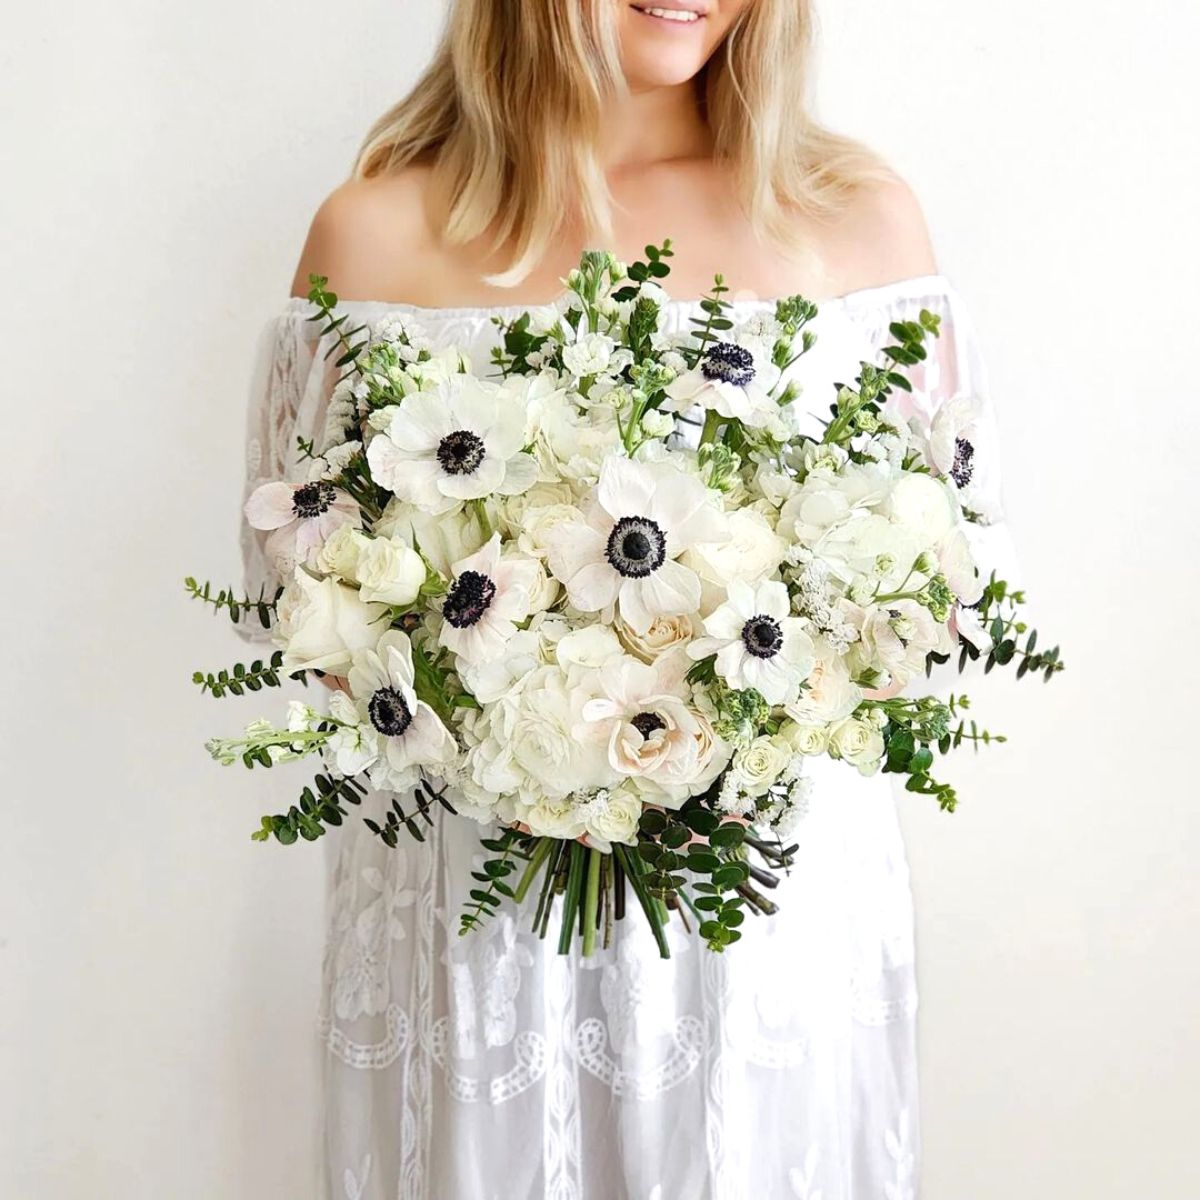 White anemone flowers in bouquet